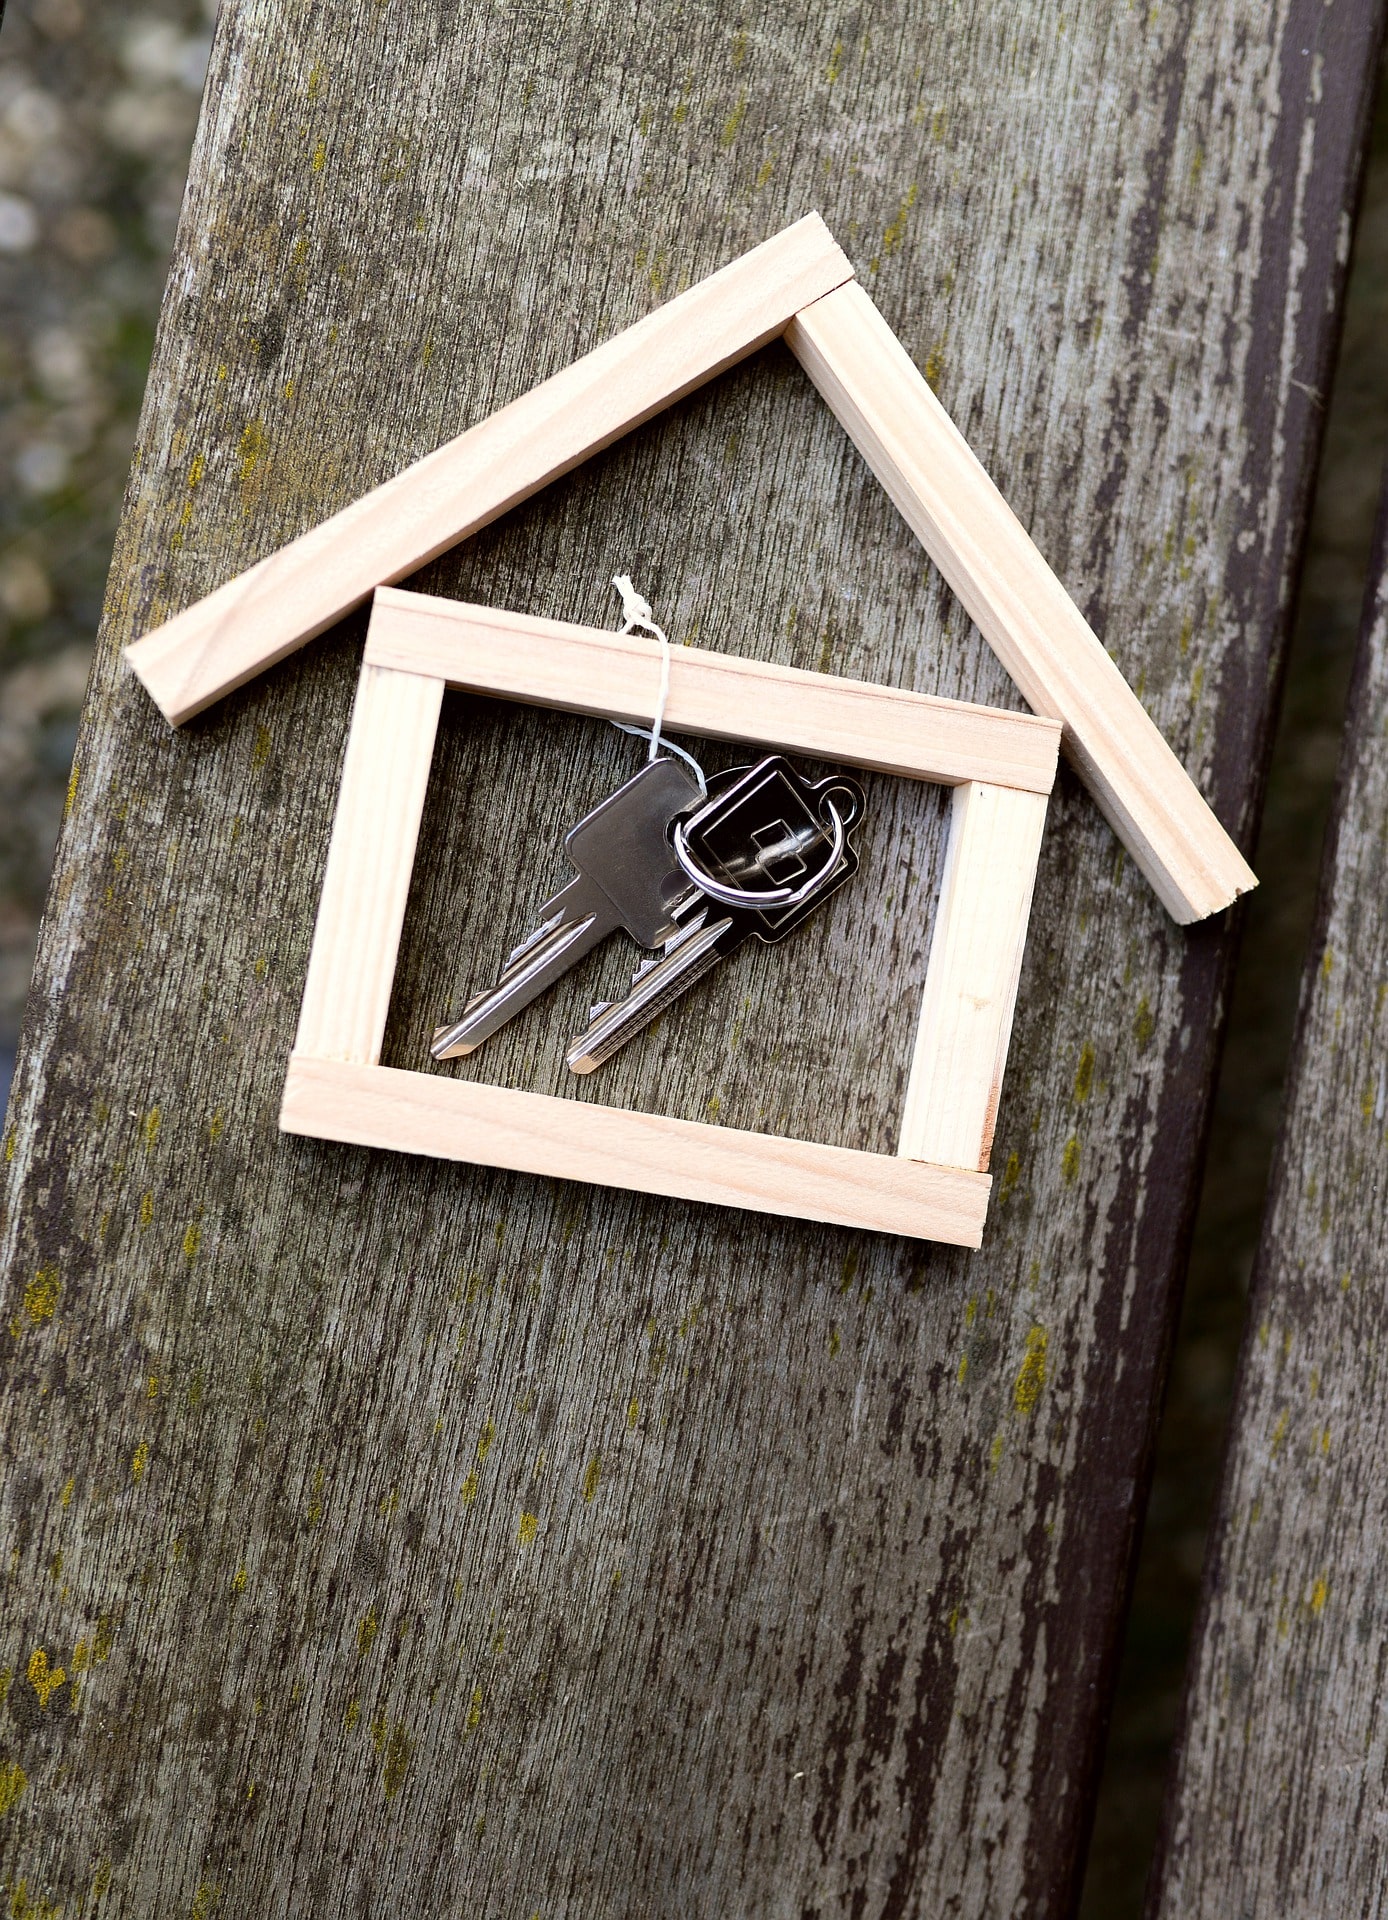 Six pieces of wood arranged in the shape of a house icon with a set of keys inside